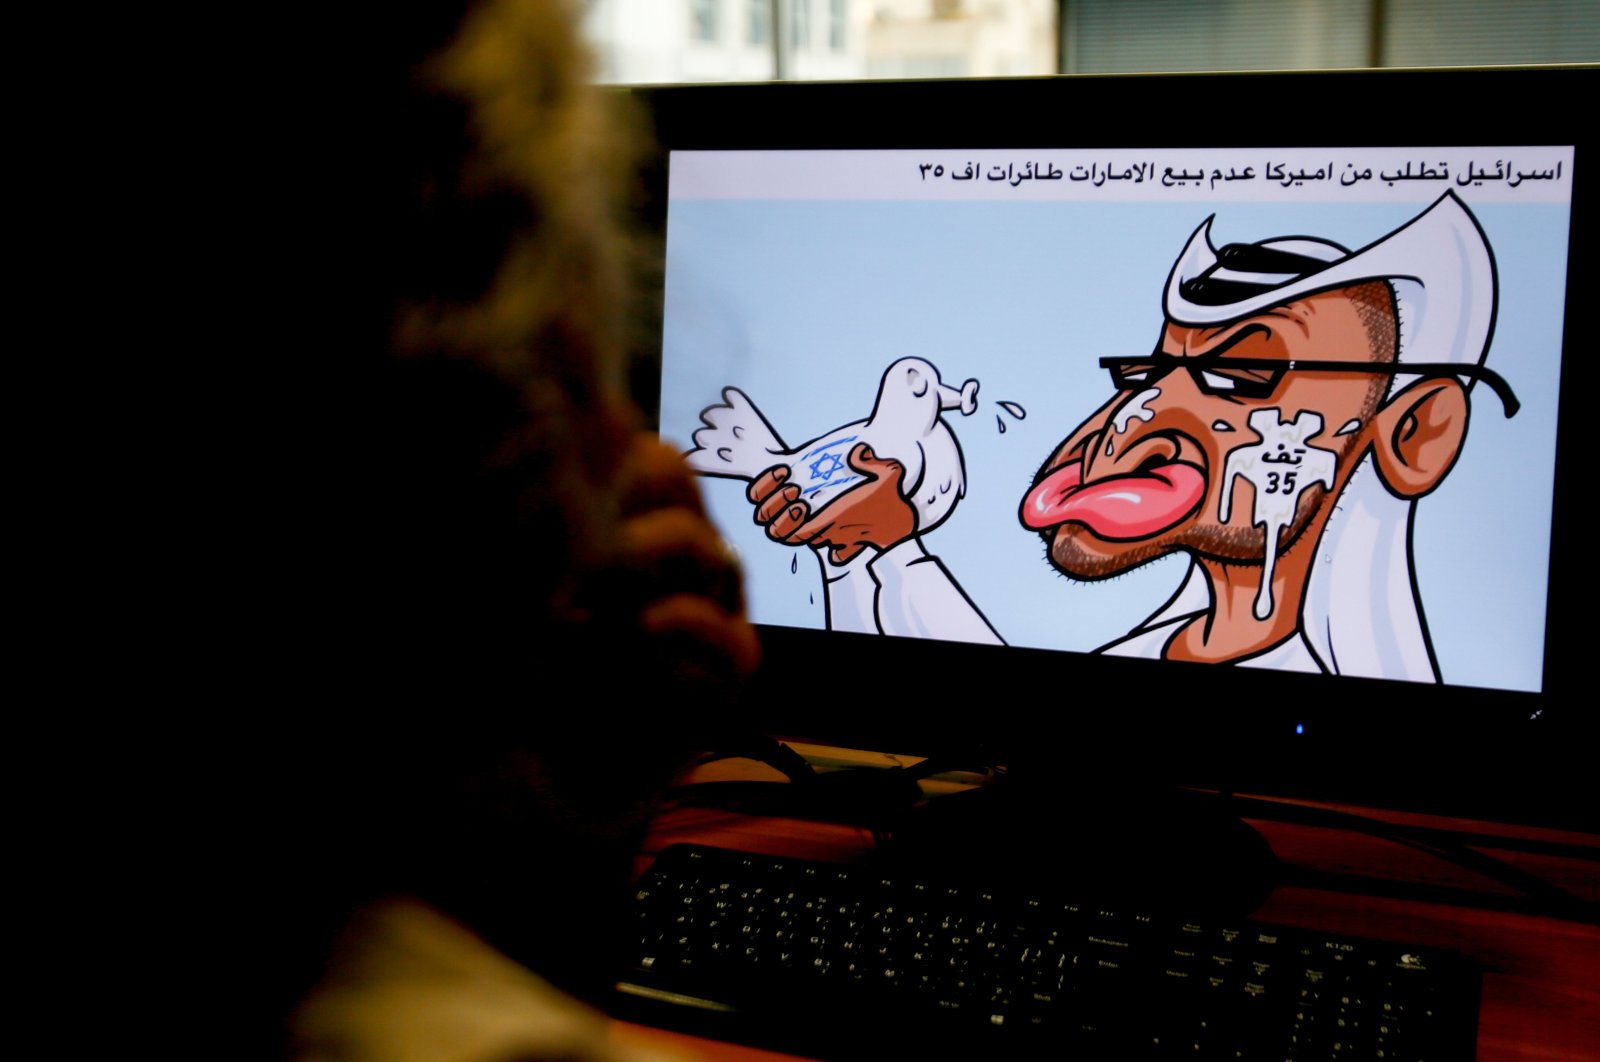 A woman looks at a caricature by Jordanian cartoonist Emad Hajjaj depicting the leader of the United Arab Emirates (UAE), Sheikh Mohammed bin Zayed al-Nahyan, holding a dove with Israel's flag on it spitting in his face with Arabic writing referring to Israel's opposition to the sale of U.S. F-35 aircraft to the UAE, on Aug. 27, 2020. (AFP Photo)